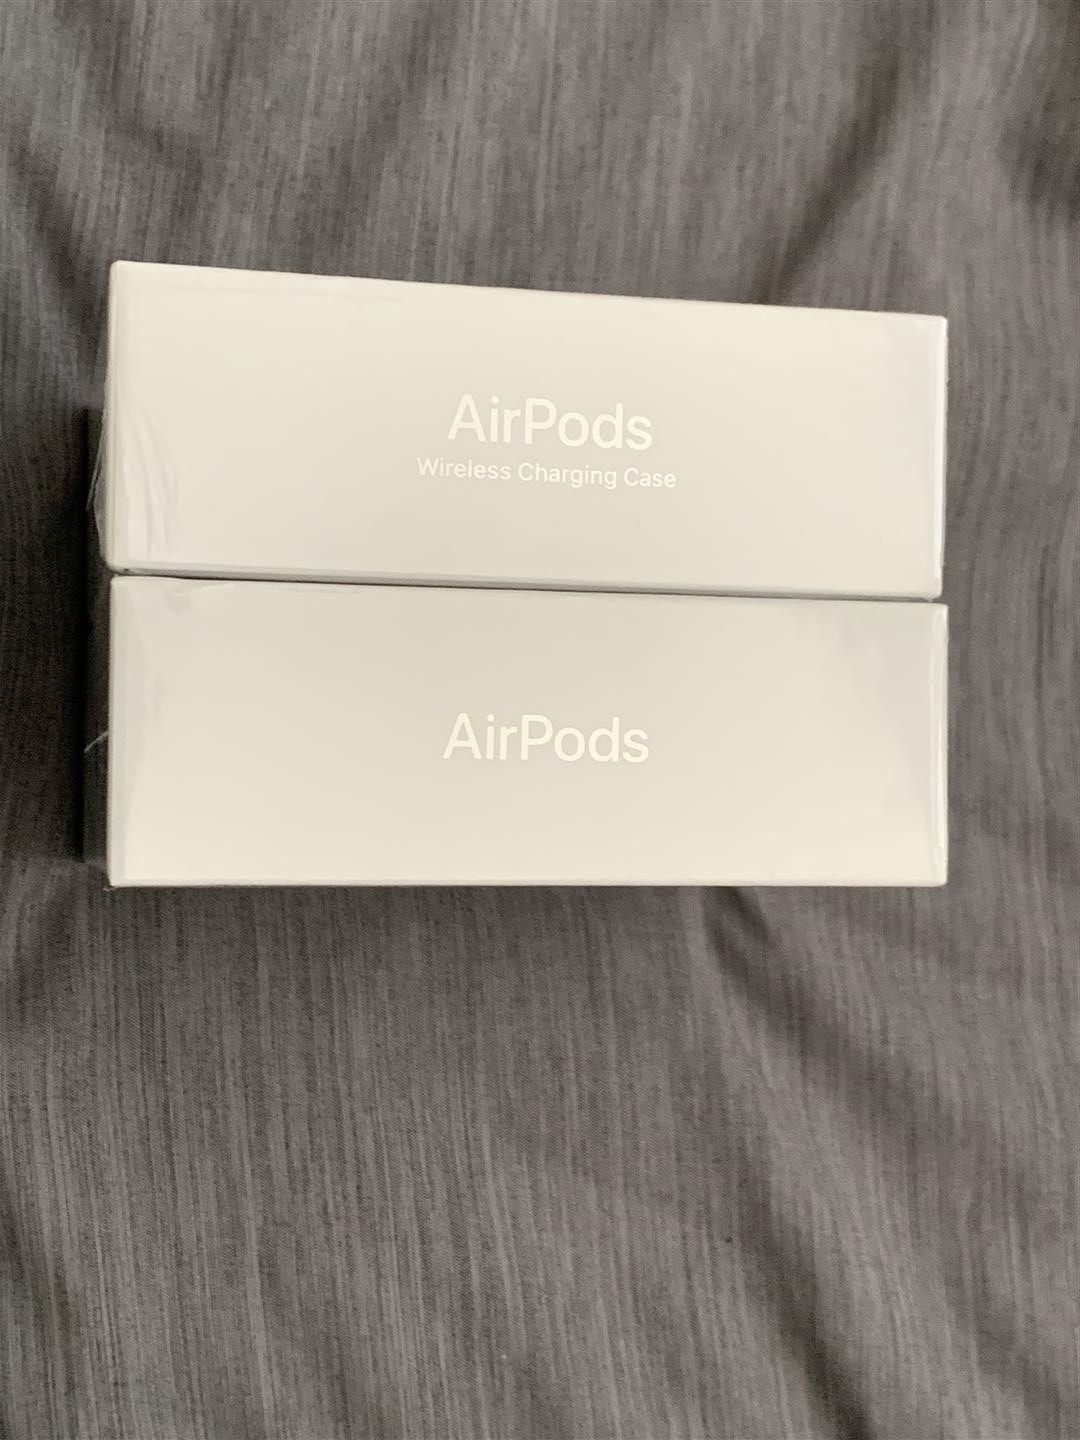 Apple - AirPods with Wireless Charging Case (Latest Model) - White & Regular Charging Case